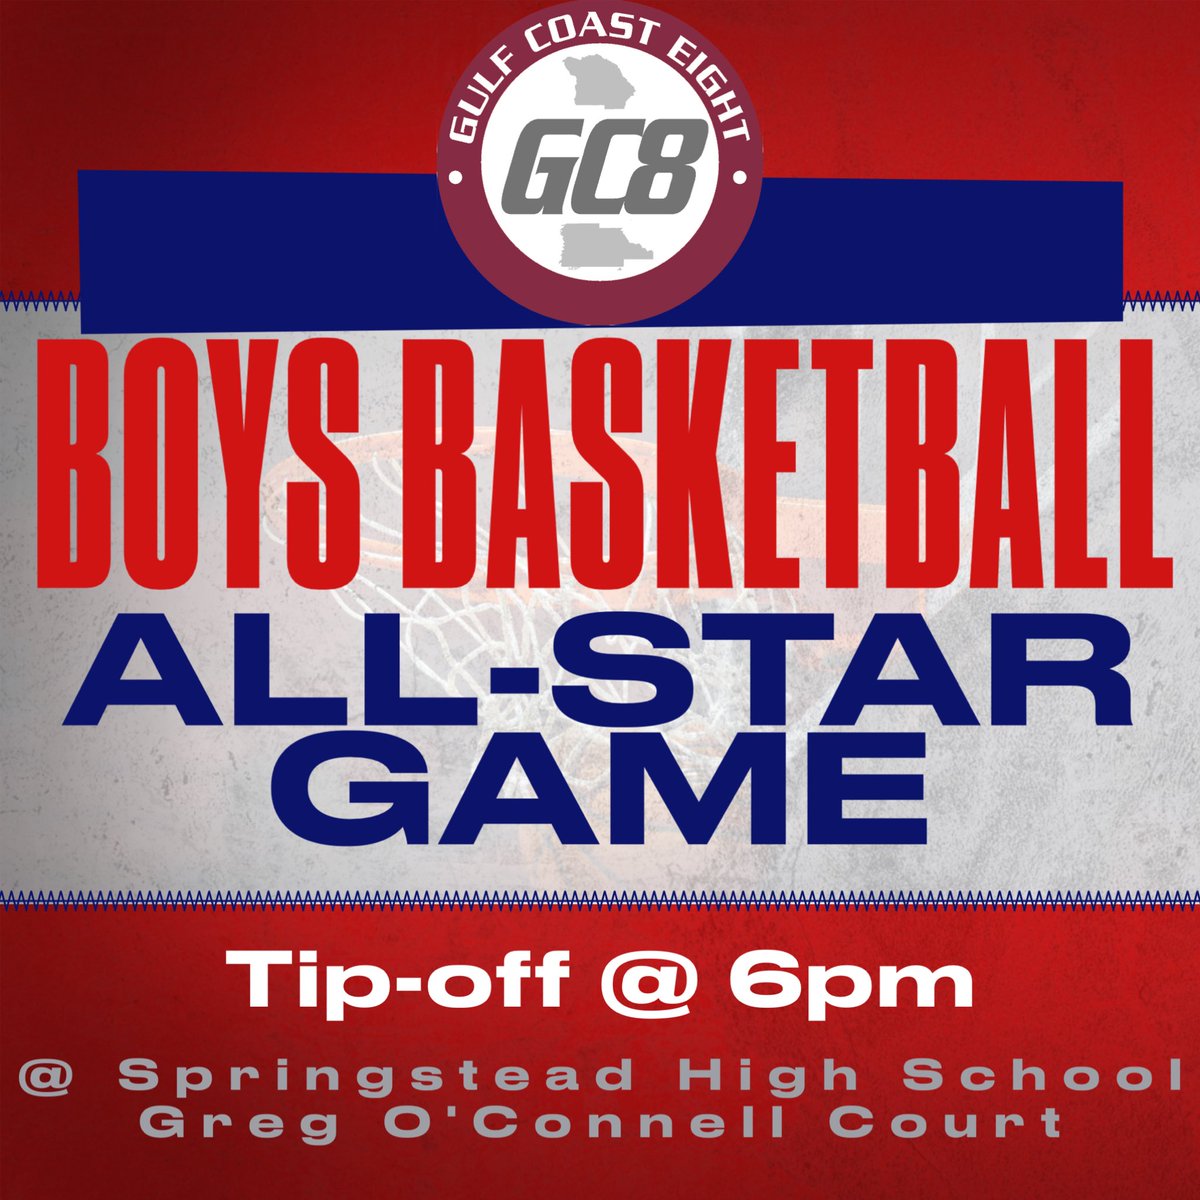 GAME DAY!!! Come and check out the top seniors in the conference battle it out in the 5th Annual GC8 All-Star game presented by State Farm. Game tips at 6pm. @springstead_ath @HernandoCo_Ath @HernandoBoys @CHSlHoops @wwhs_bball @LecantoBBall @CRHSPirates @Citrus_Canes